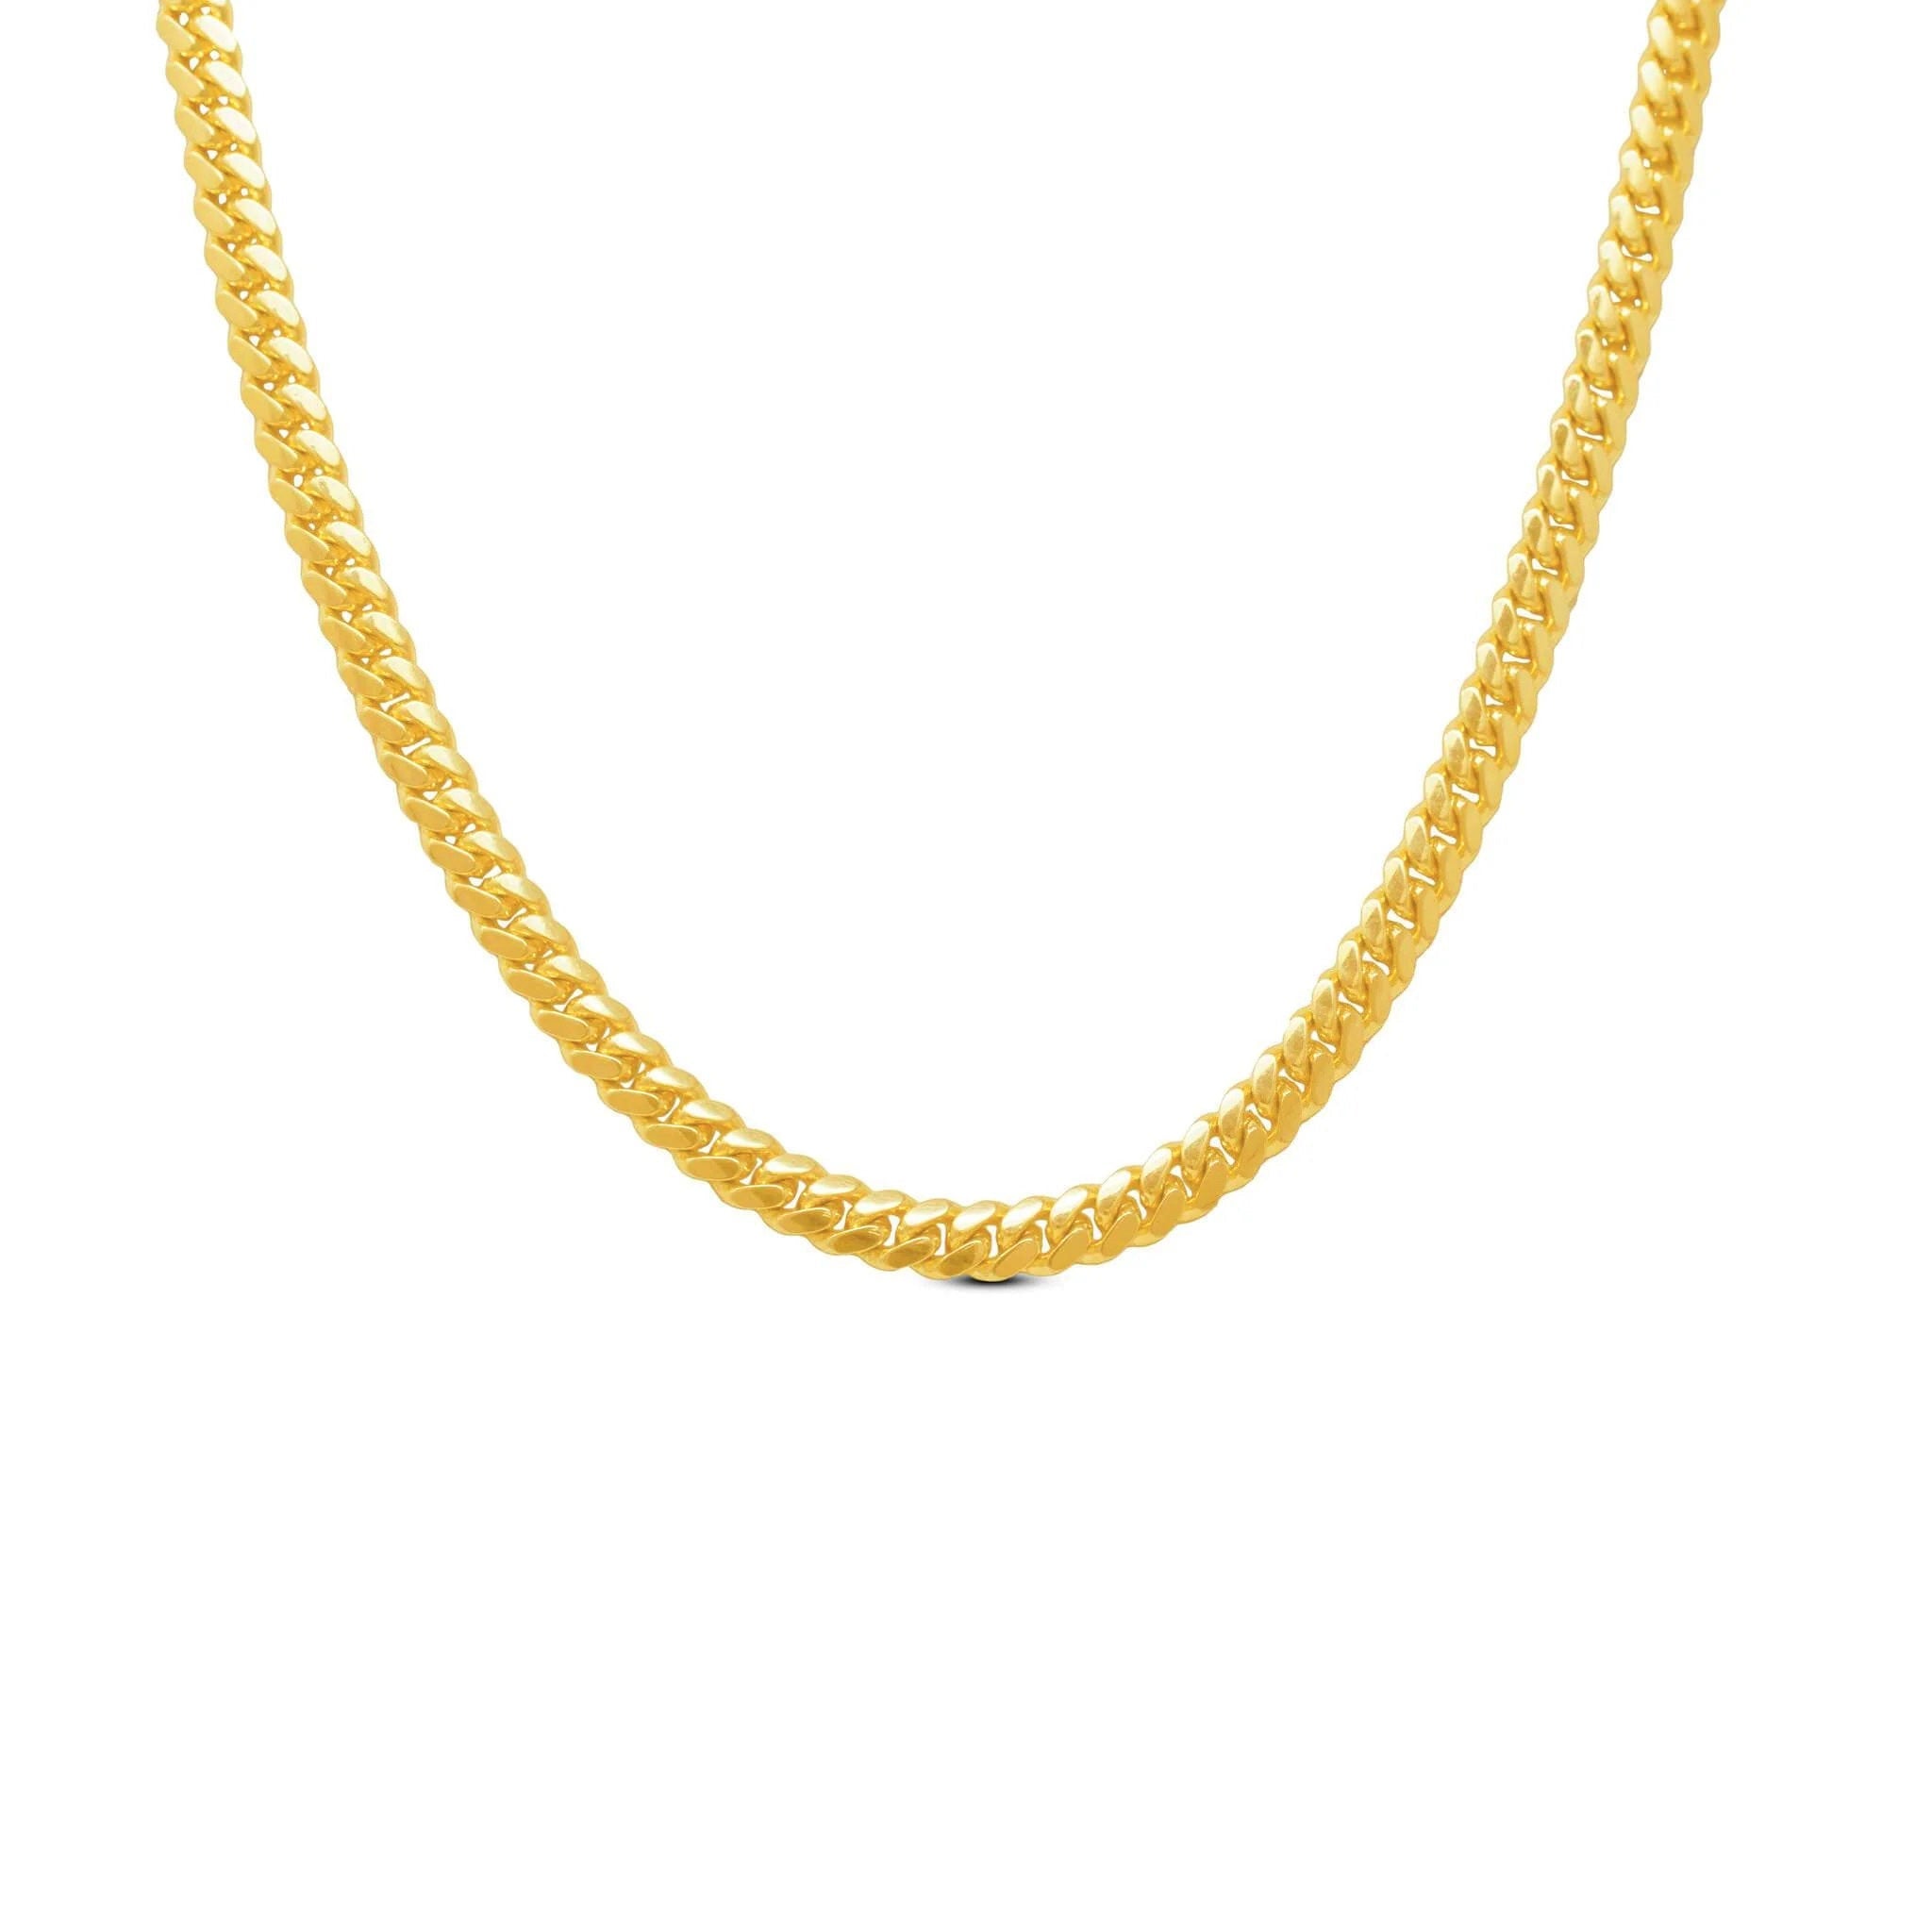 17mm Miami Cuban Link Bracelet in 14K Solid Yellow Gold